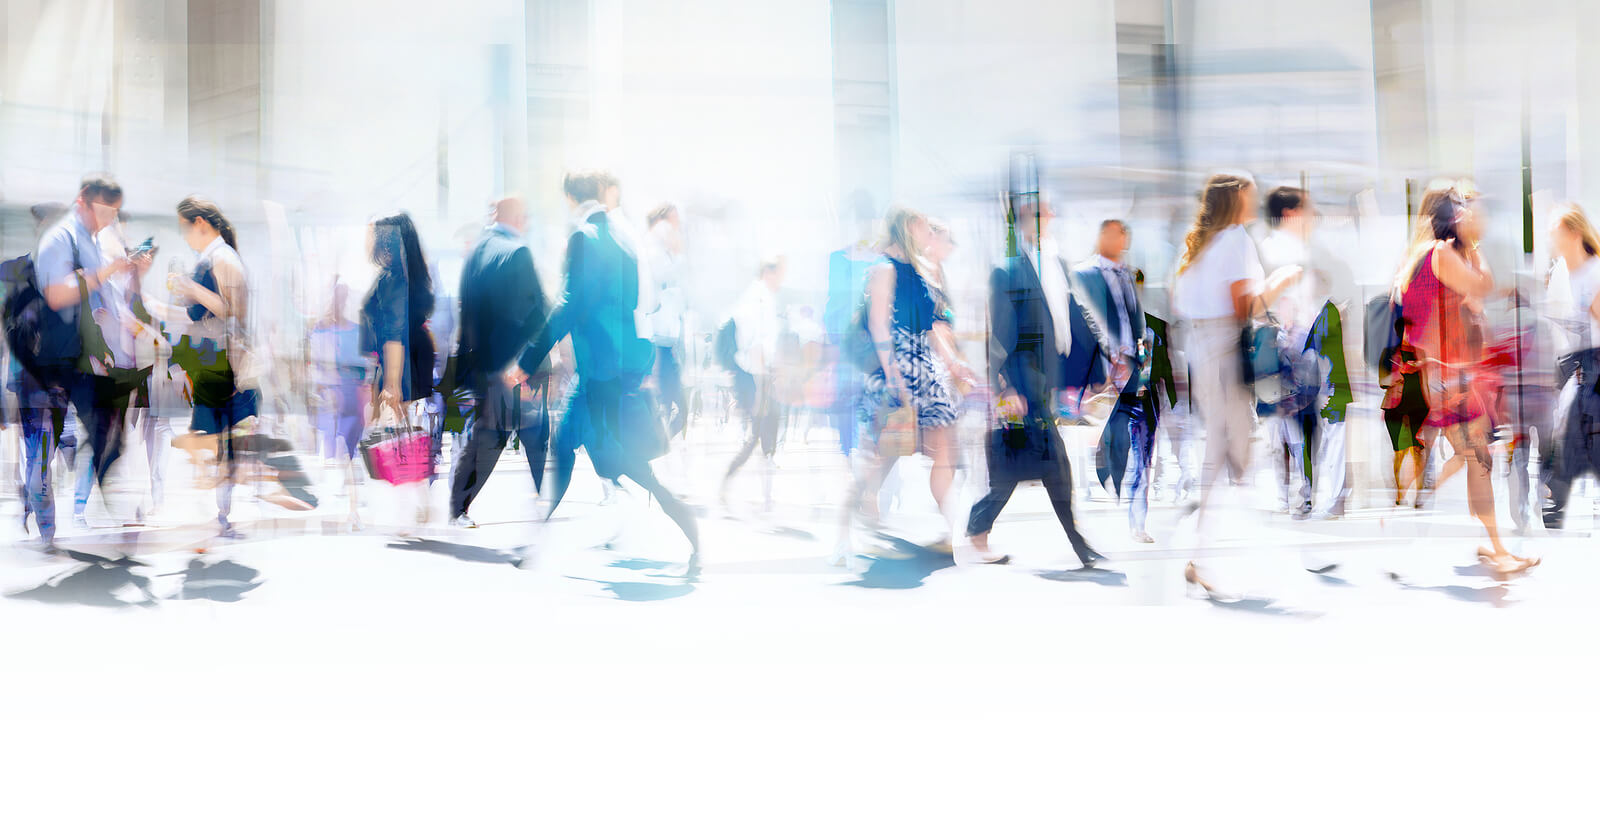 Photo of business people walking in London slightly blurred representing the stress and anxiety that can occur naturally. A counsellor can help business people manage anxiety & perform at top level.